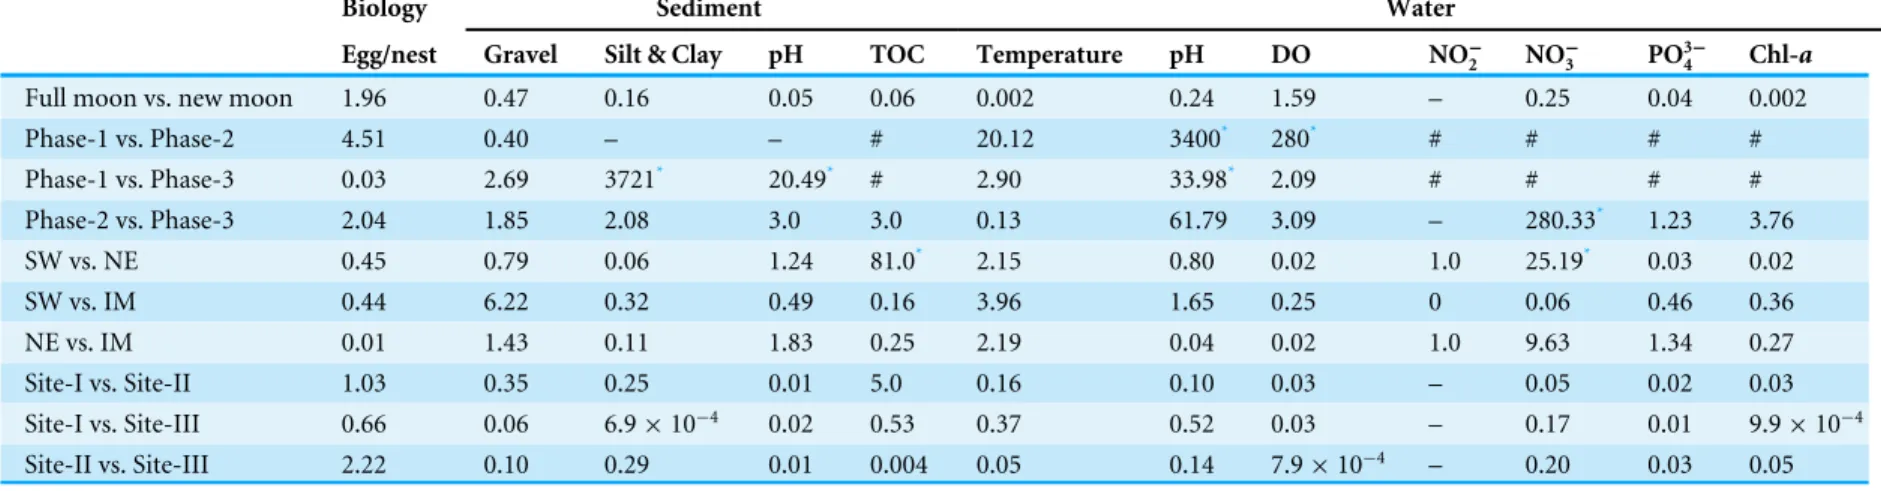 Table 6 Pair-wise statistical variations (F values based on One-Way ANOVA) within biological and environmental parameters in relation to their study phases, sea- sea-sons, sampling sites and lunar periods.